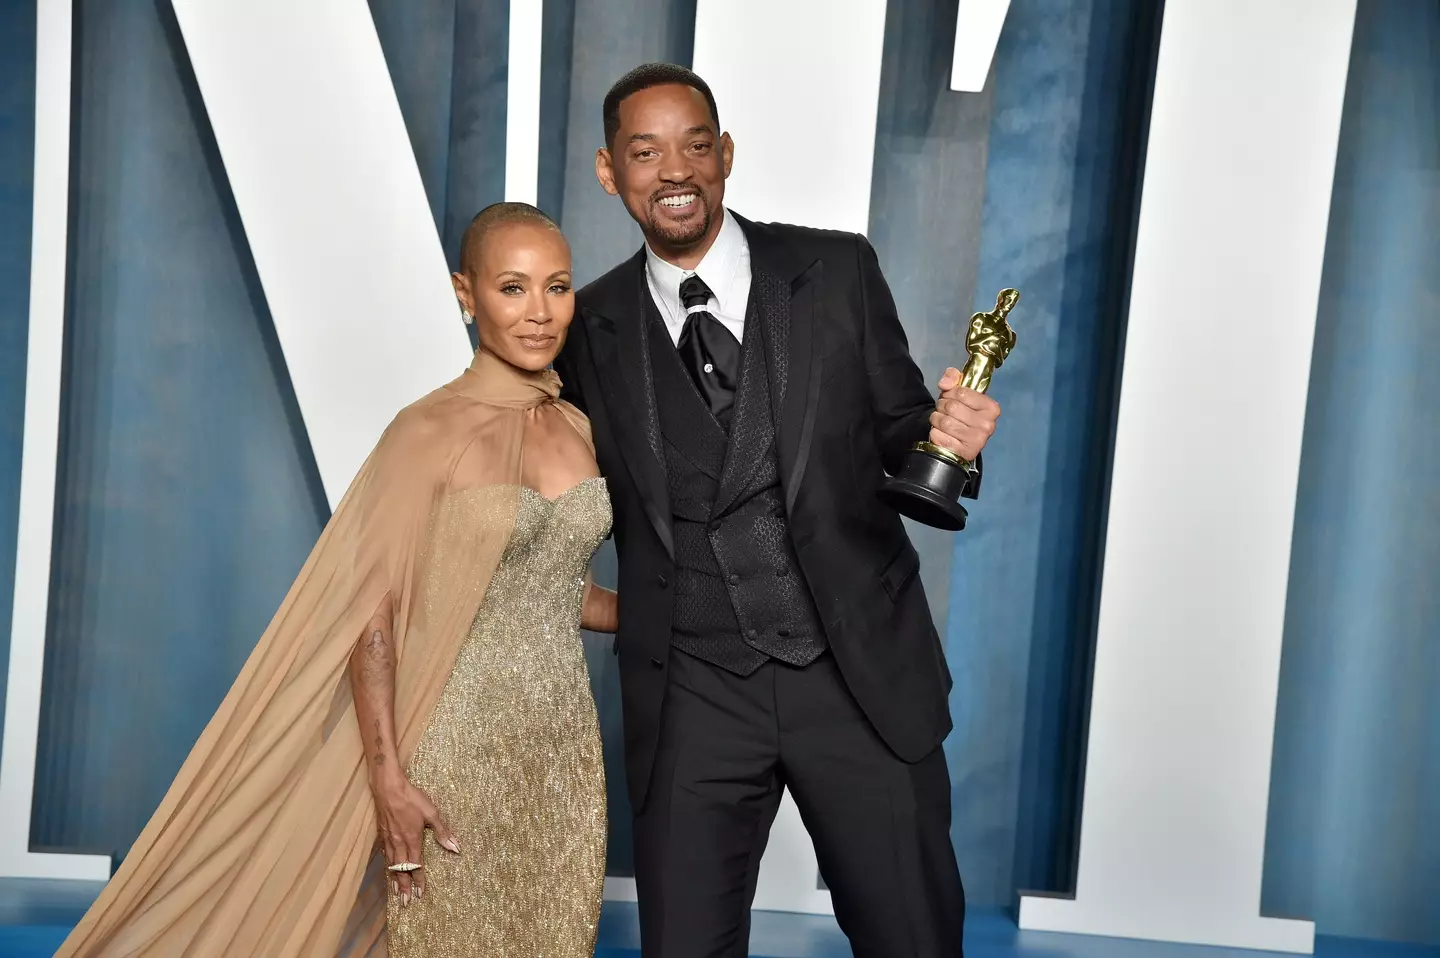 Jada Pinkett Smith and Will Smith have dominated the headlines this week.